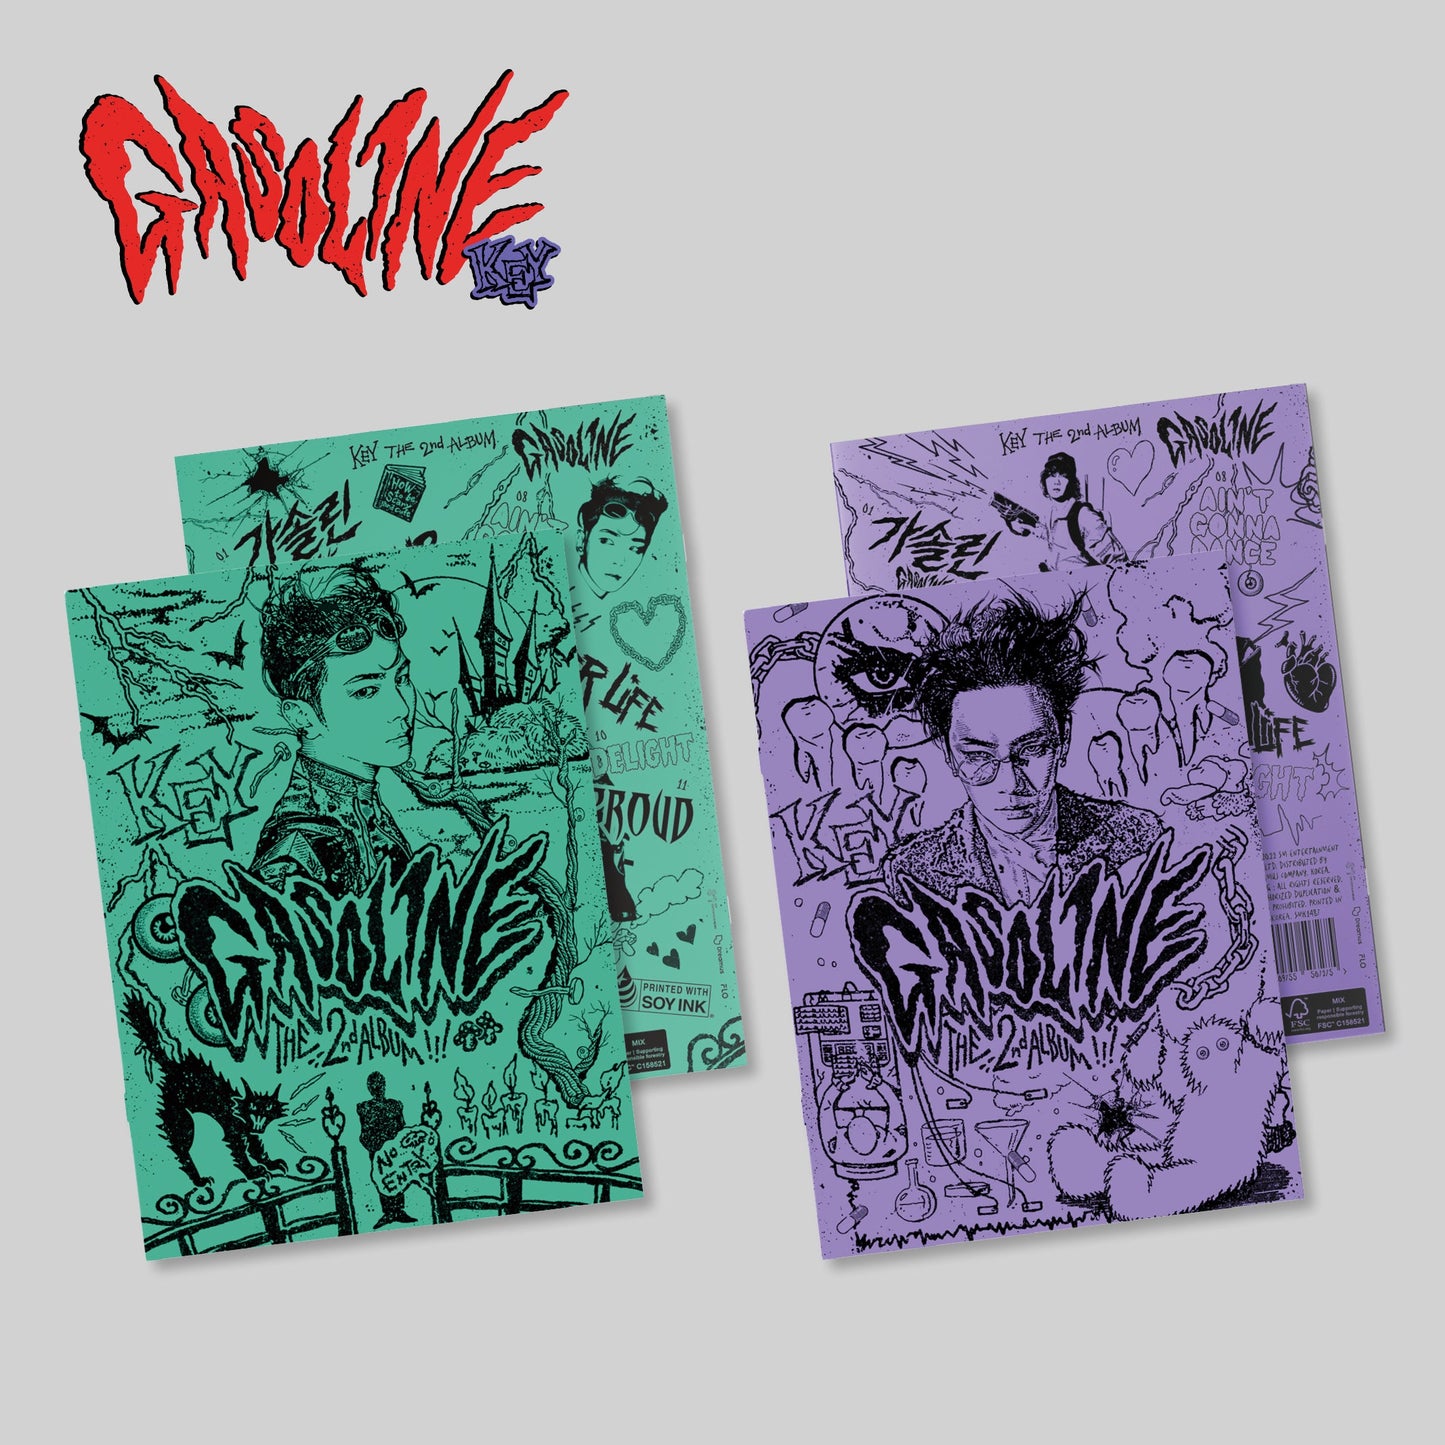 KEY (SHINEE) 2ND ALBUM 'GASOLINE' (BOOKLET) COVER